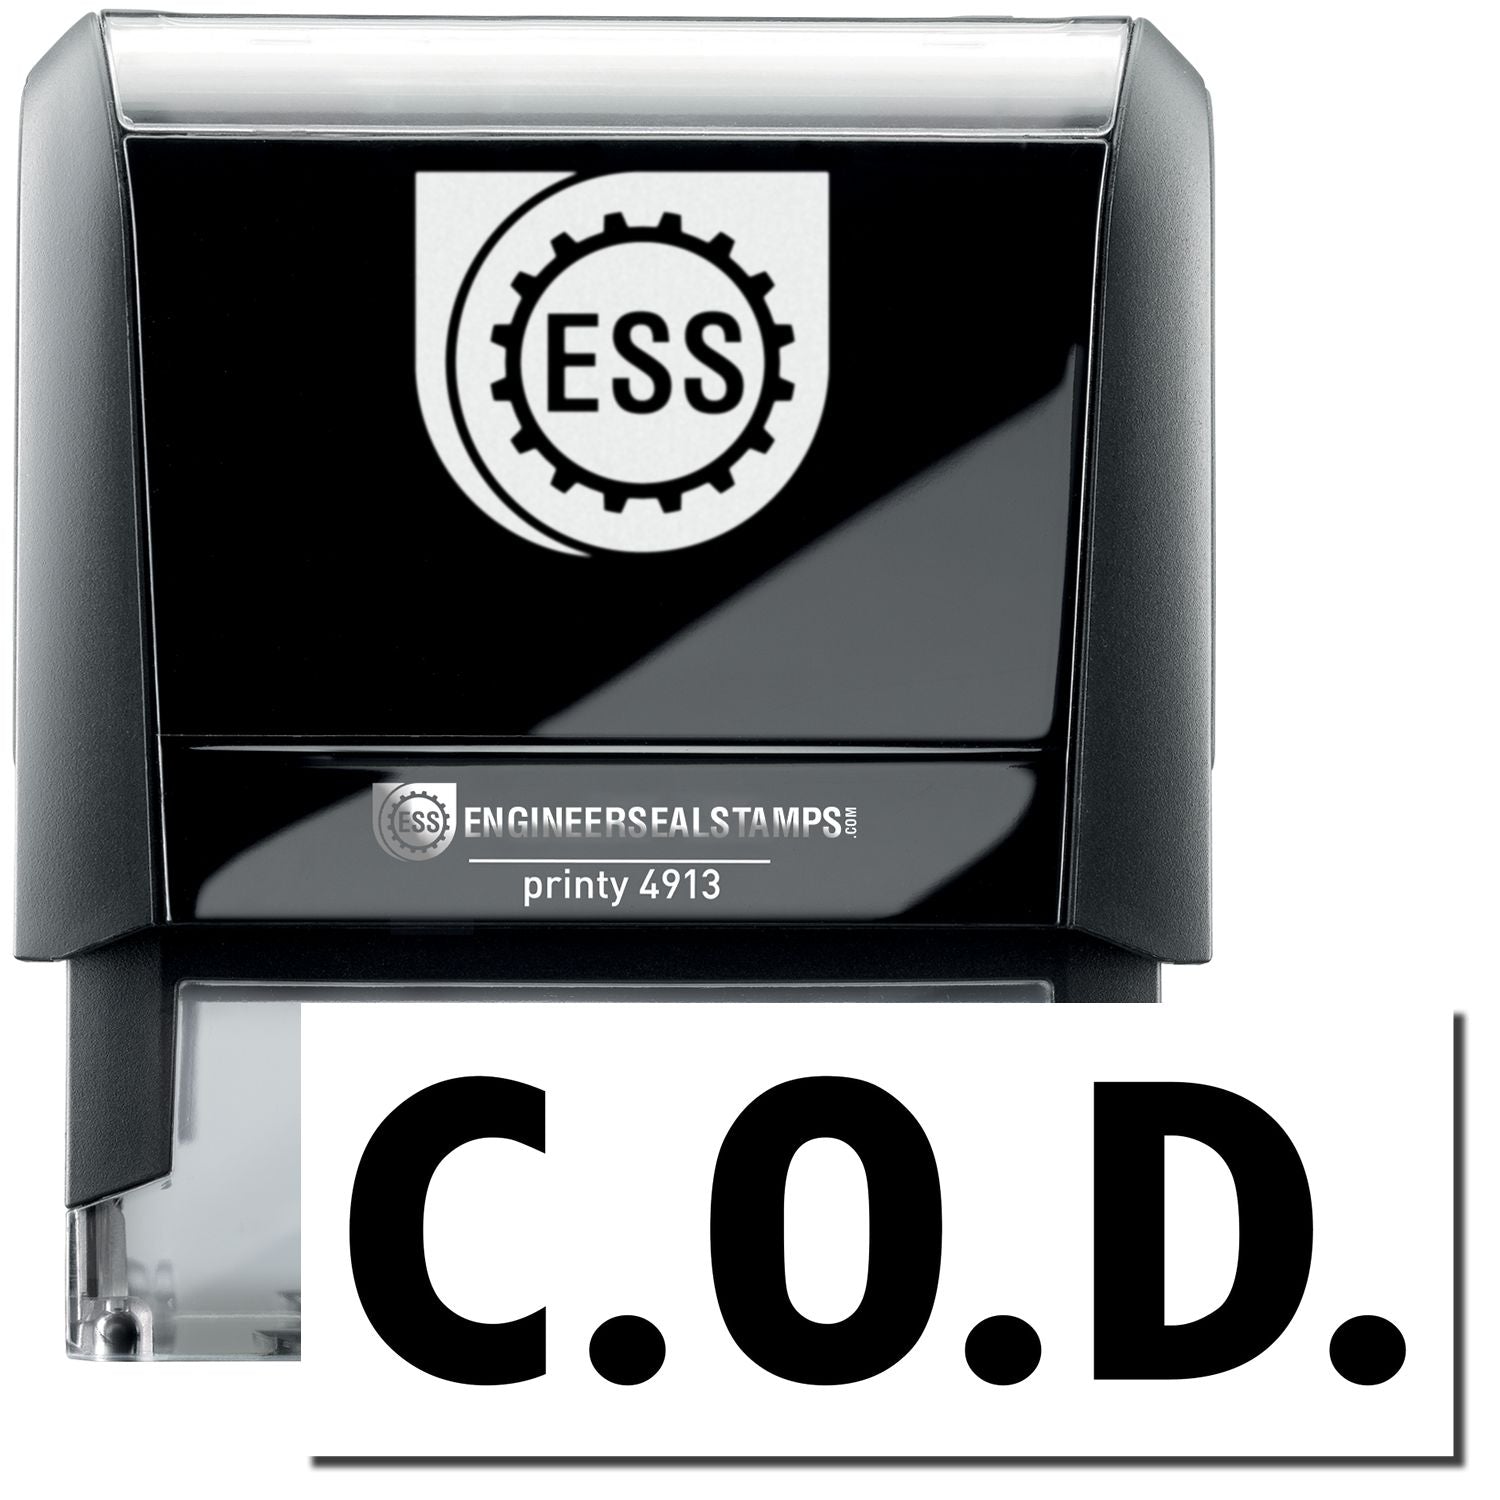 A large self-inking stamp with a stamped image showing how the text "C.O.D." in a large bold font is displayed by it.